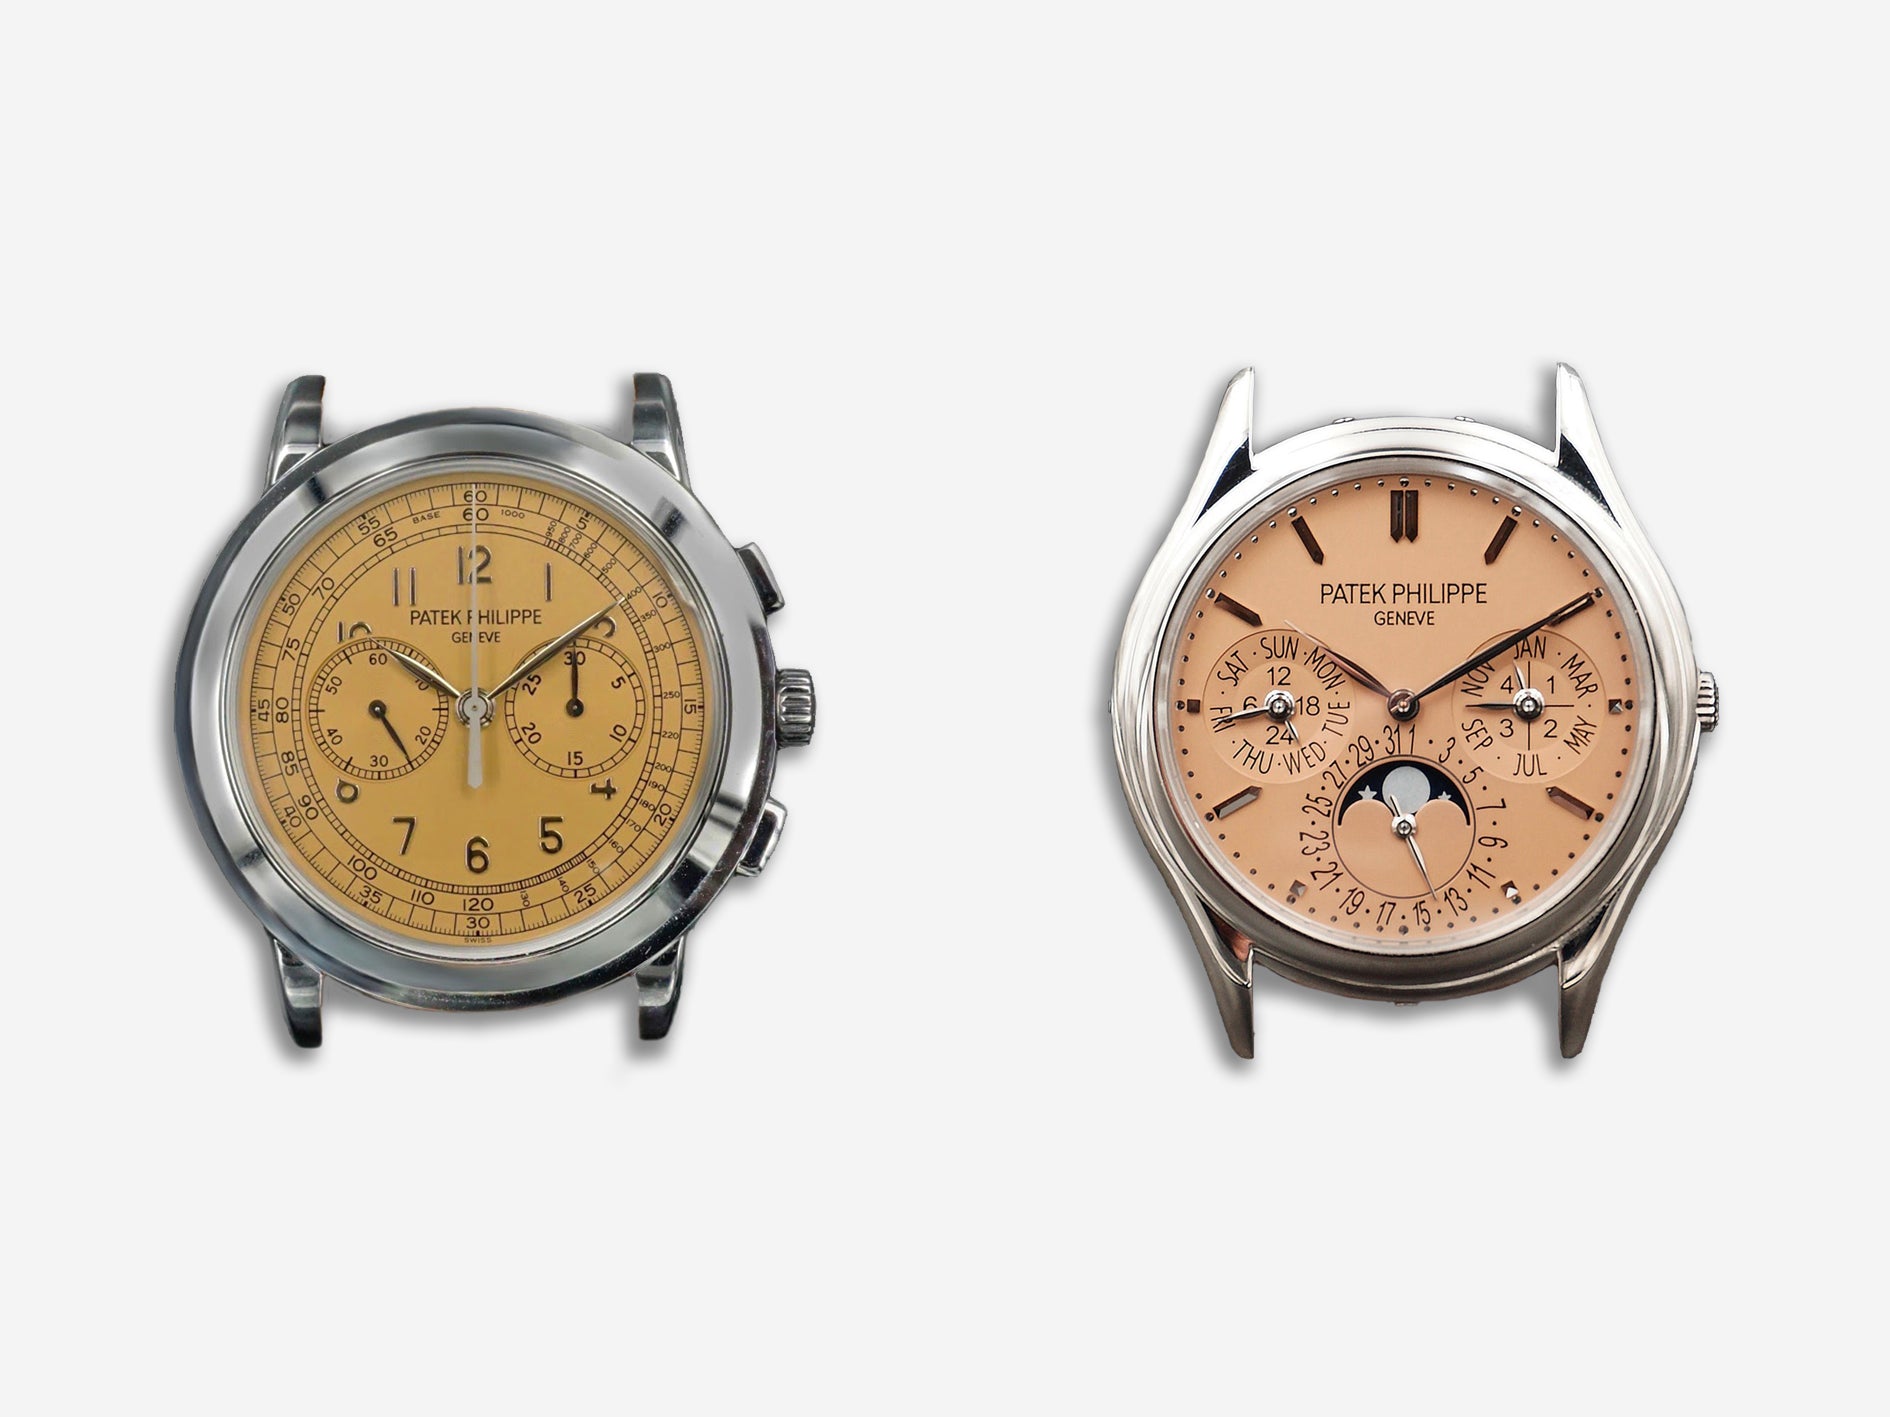 Patek Philippe 5070G and 3940G Saatchi Editions with salmon dials